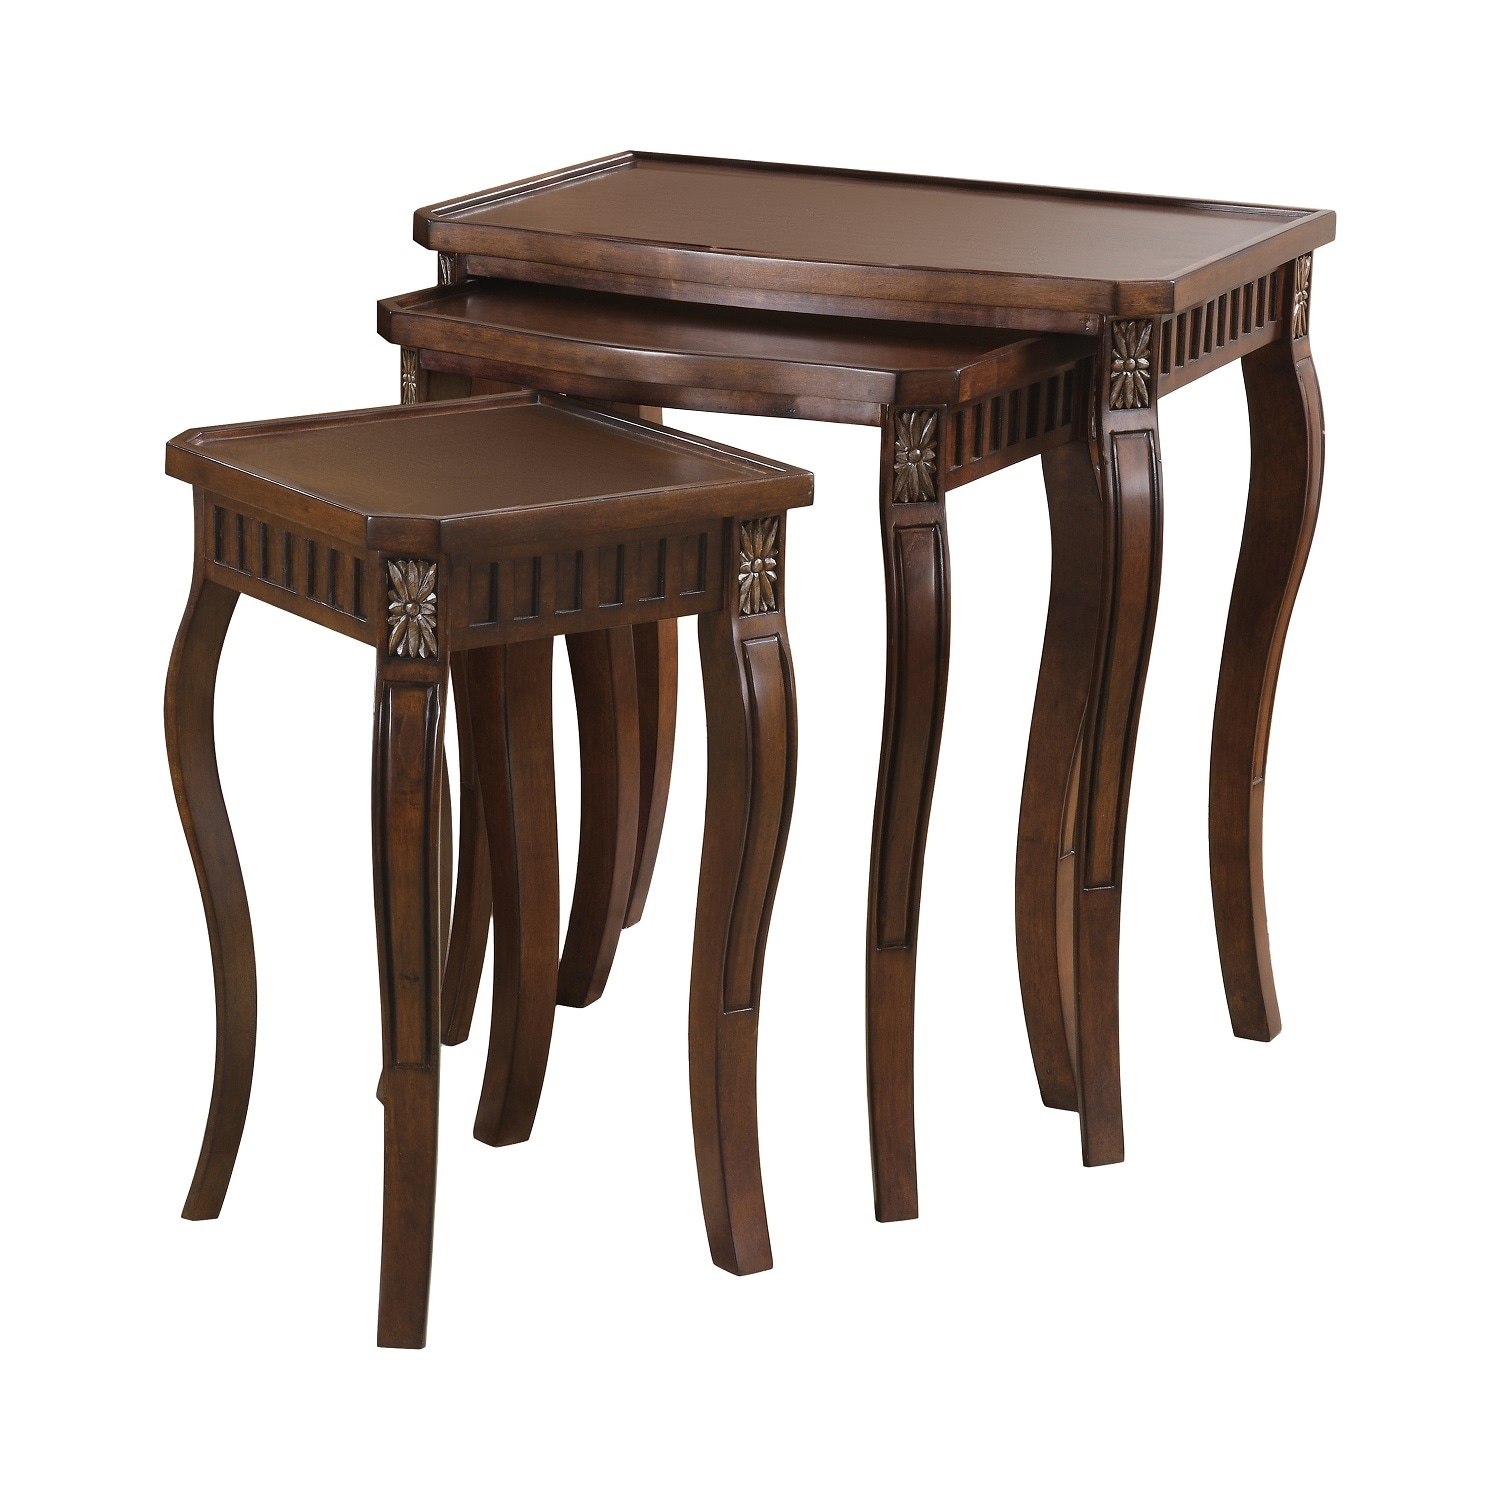 Simple Relax 3 Piece Nesting Table Set with Curved Leg in Warm Brown